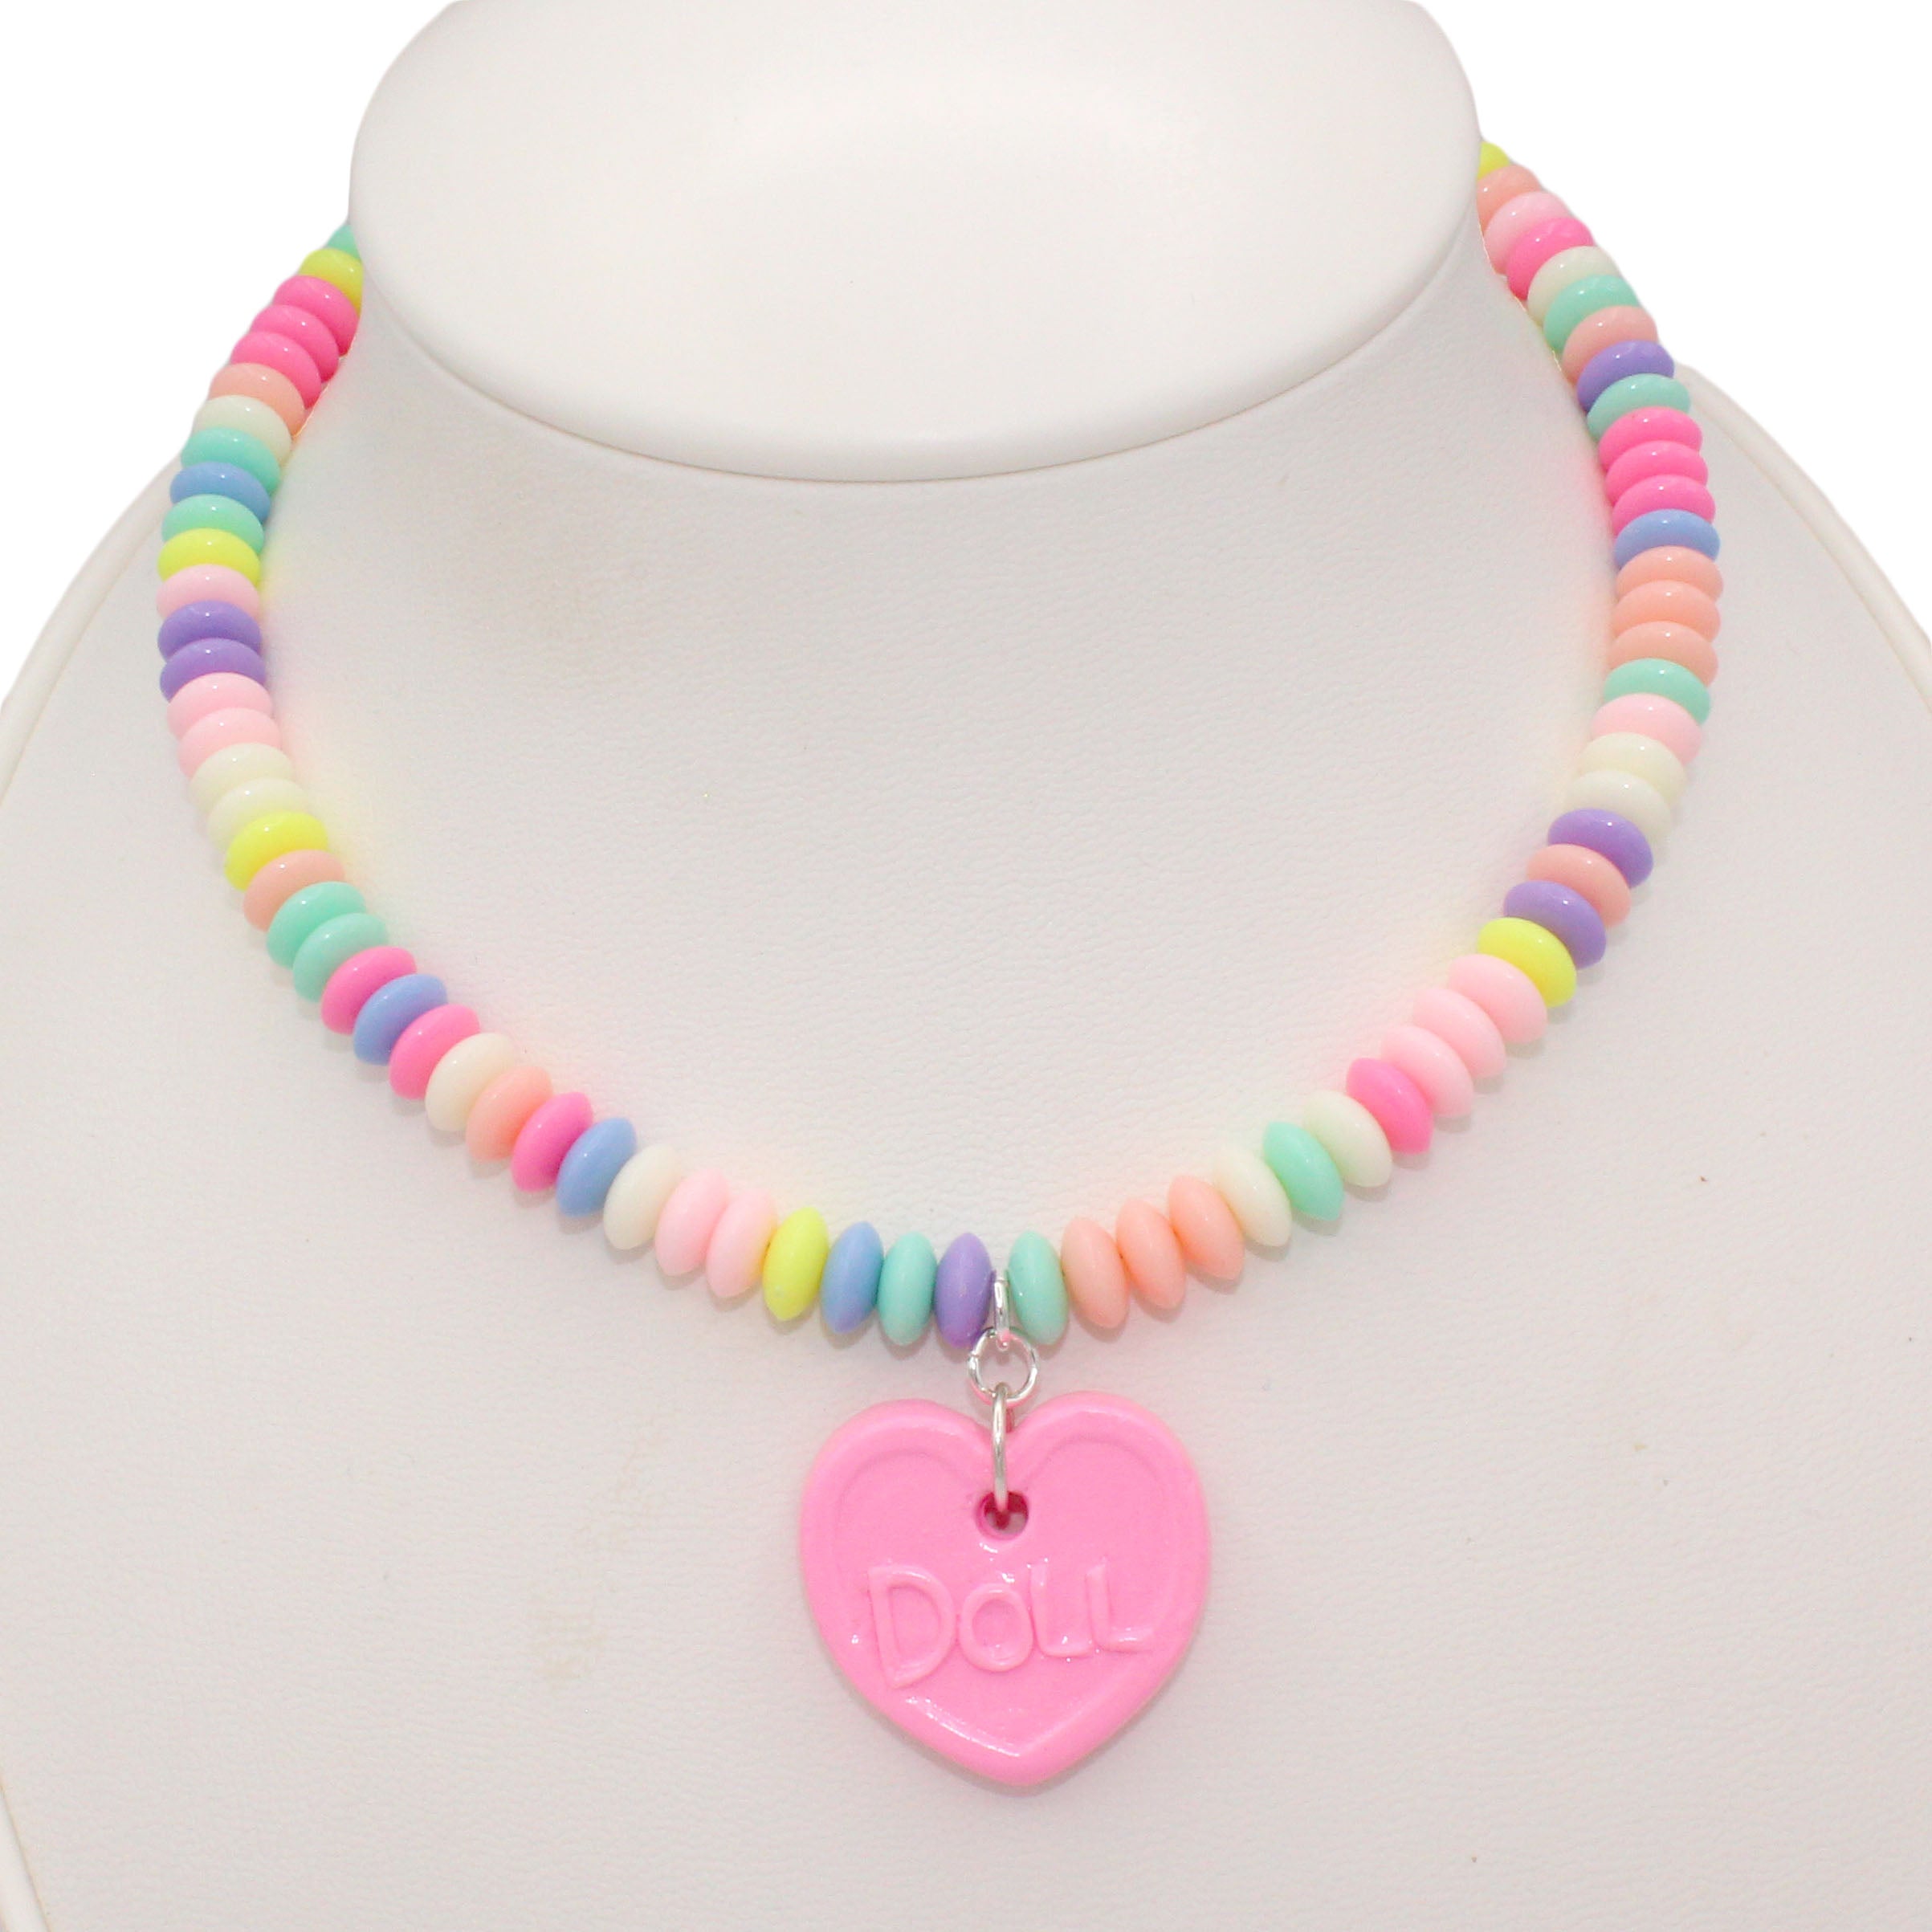 Candy Necklaces Bulk By Cede - 100 Count | Sweet City Candy